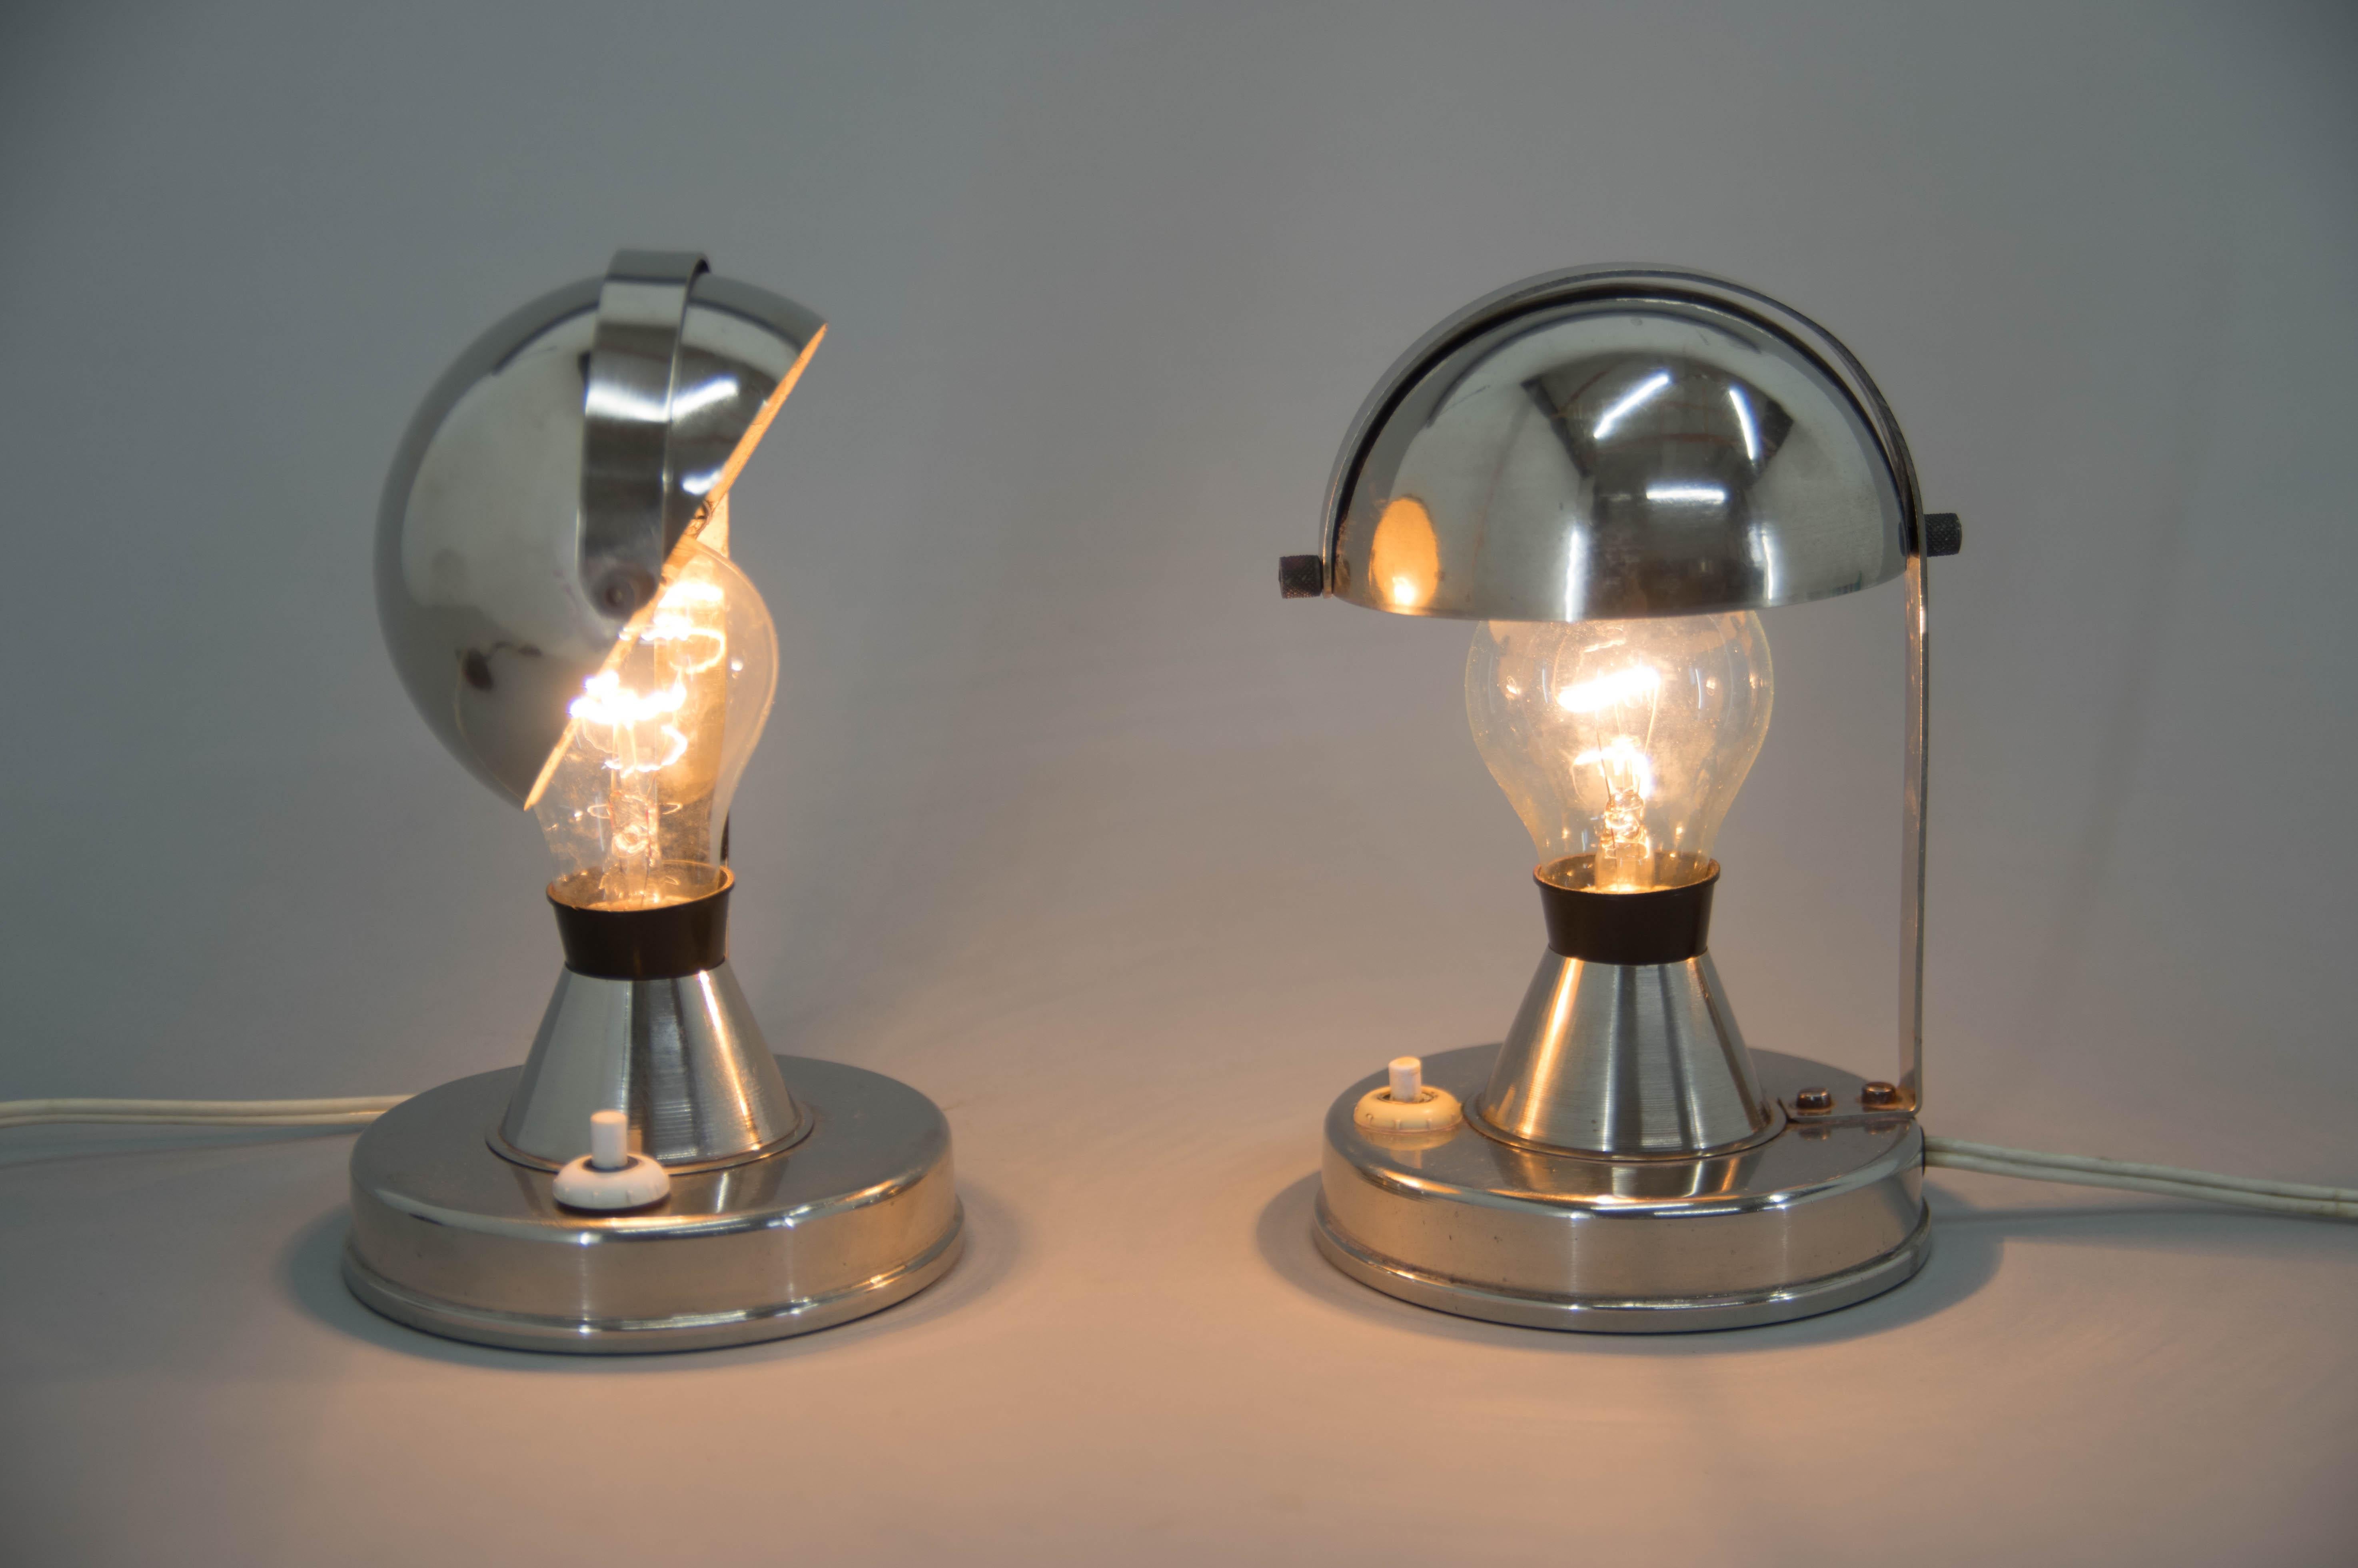 Bauhaus table lamps with flexible shades. Designed by Franta Anyz for IAS.
Original nickel polished, rewired - 1 x 40W, E25-E27 bulb
US plug adapter included.